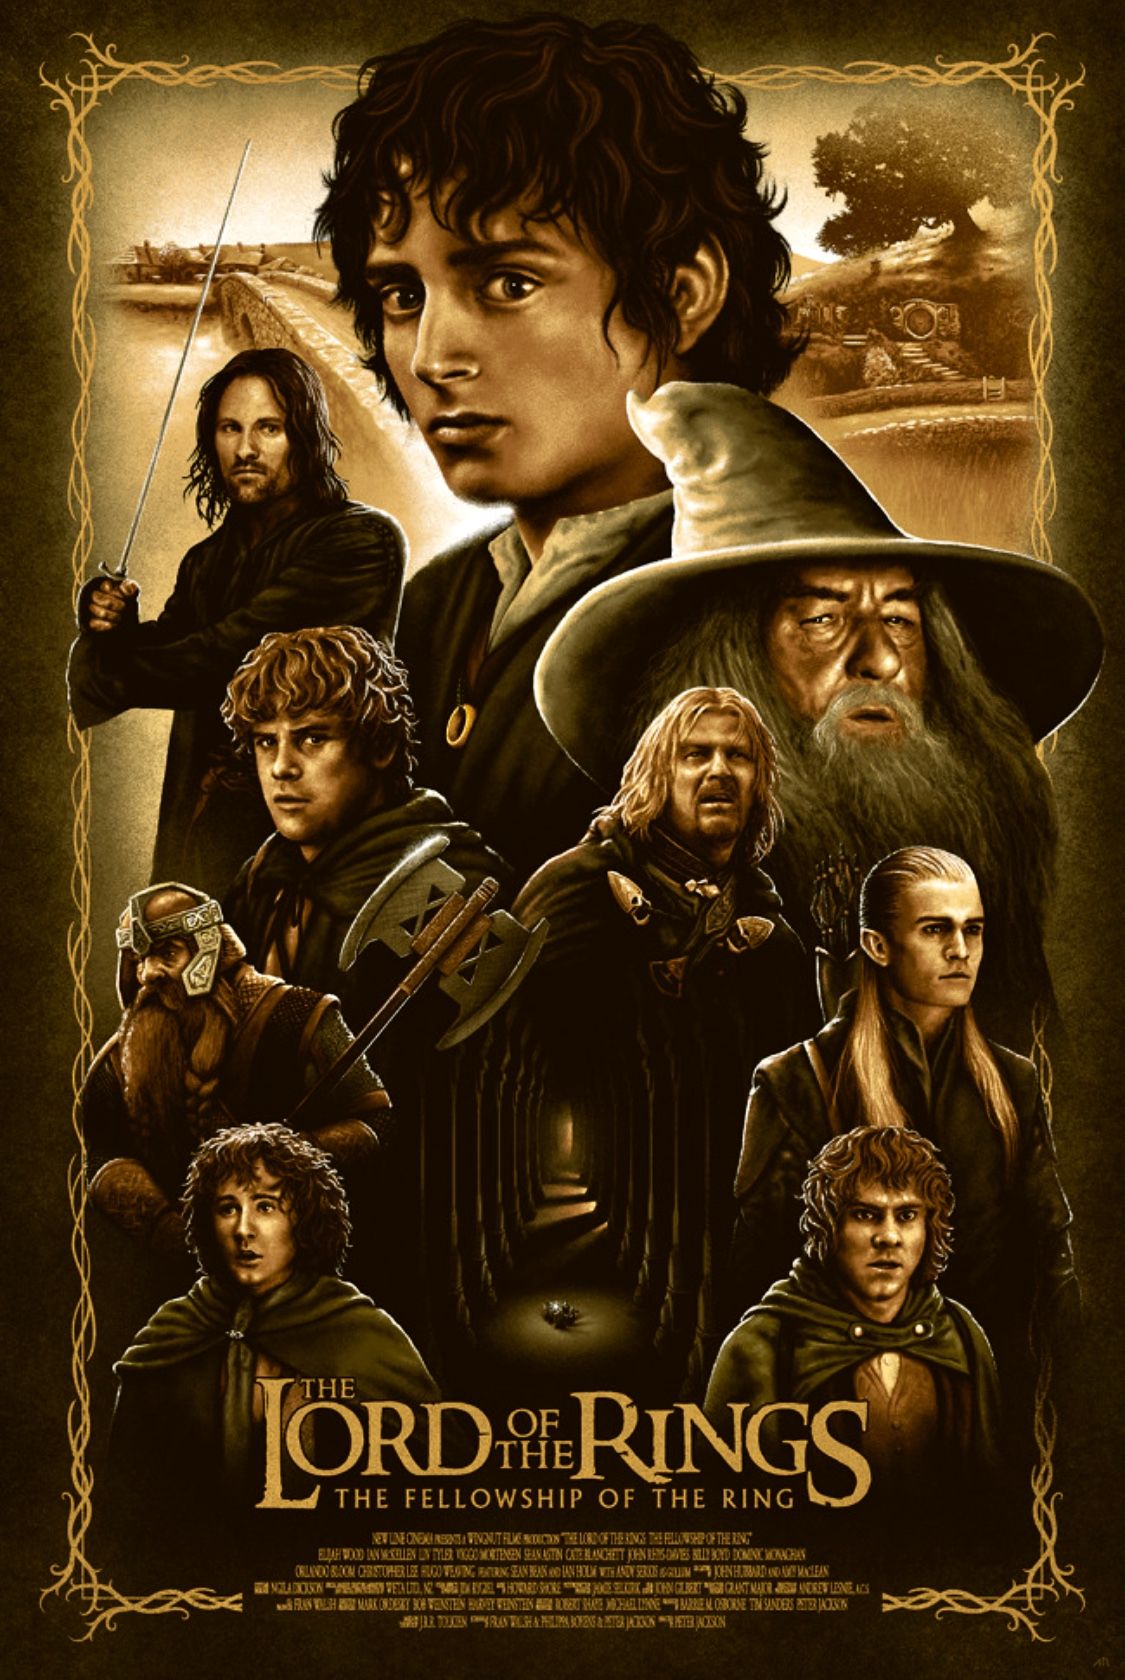 The poster of the Lord of the Rings movie